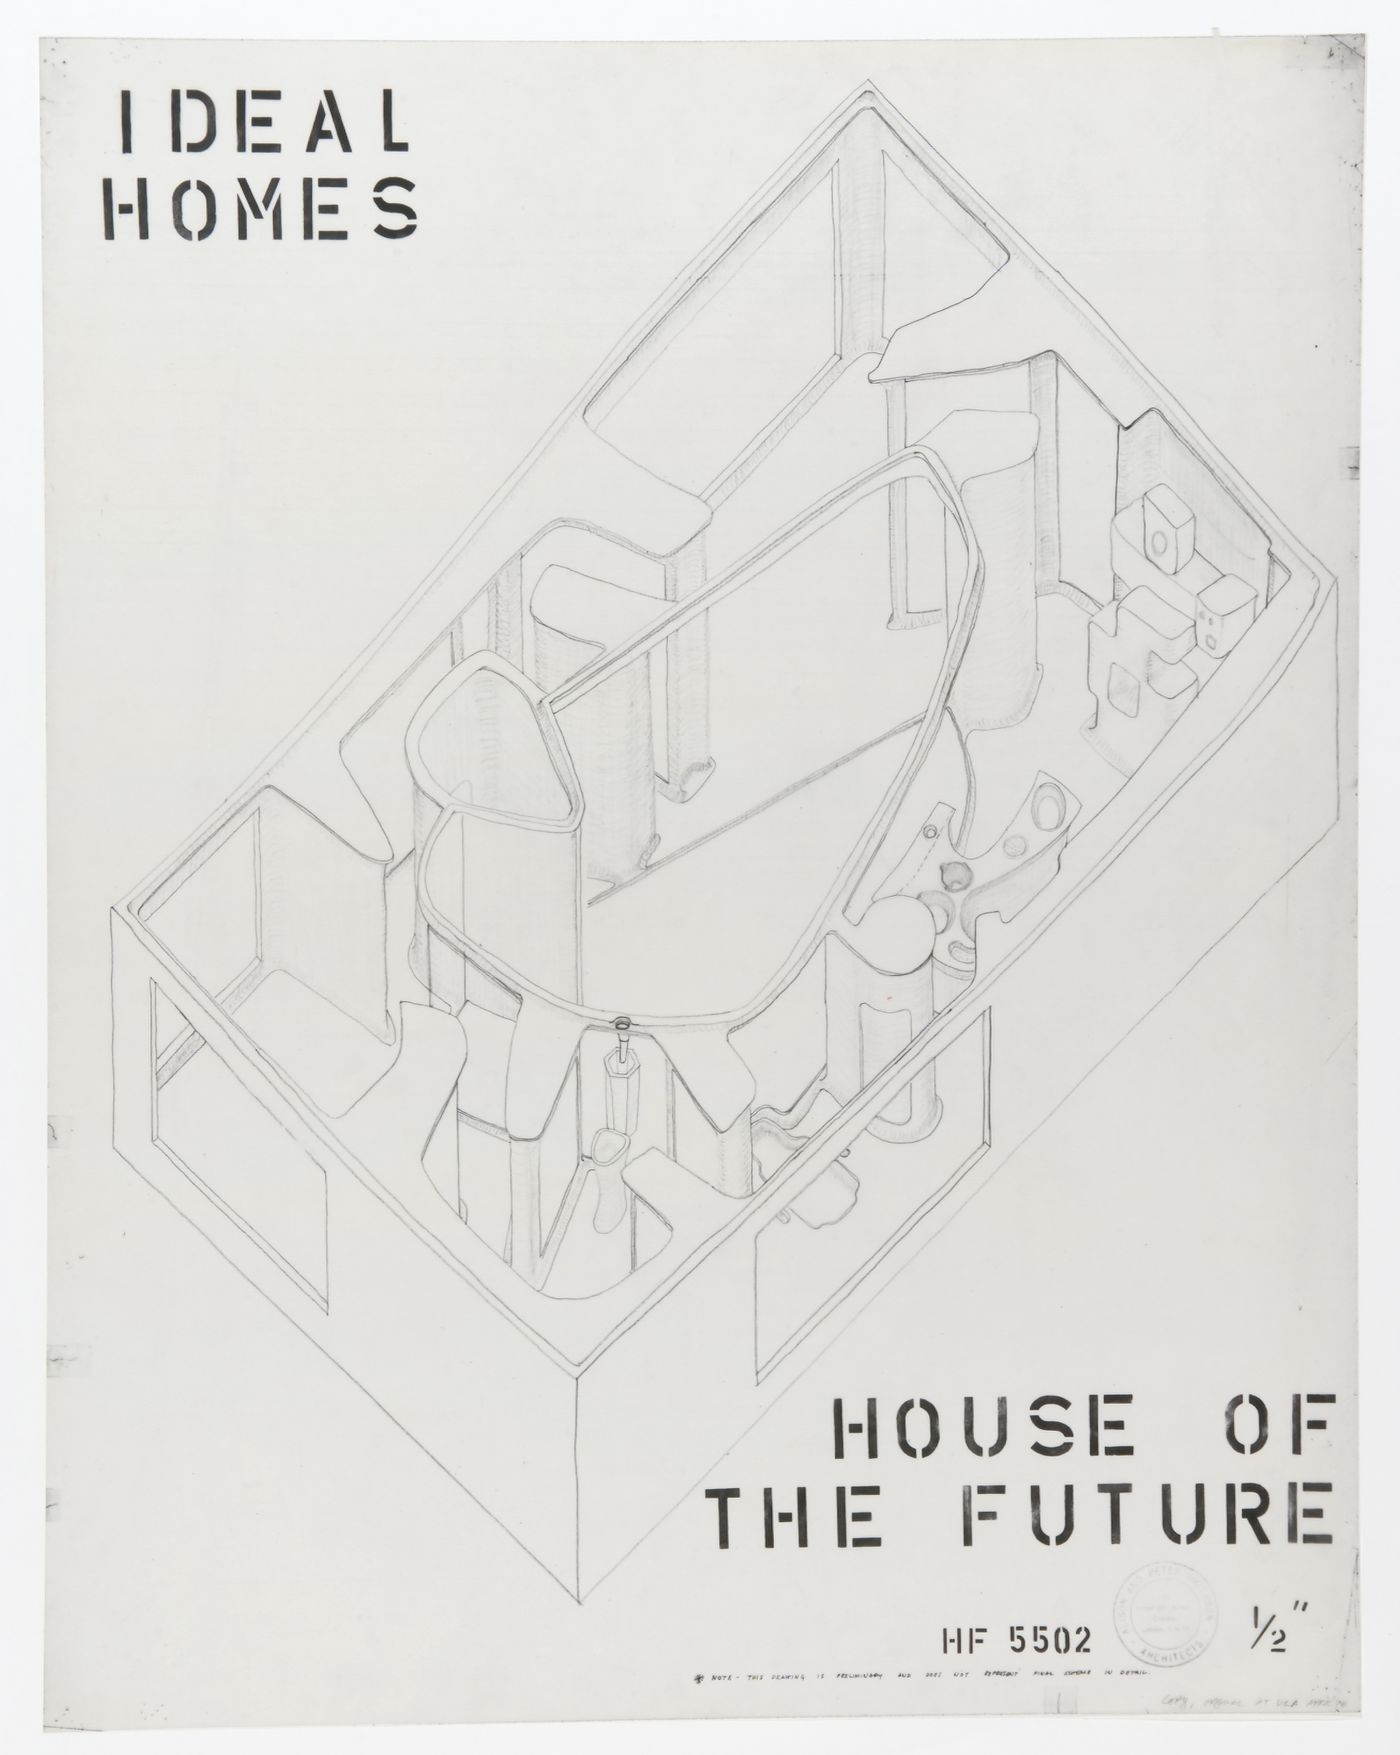 Axonometric for the House of the Future, Daily Mail Ideal Homes Exhibition, London, England